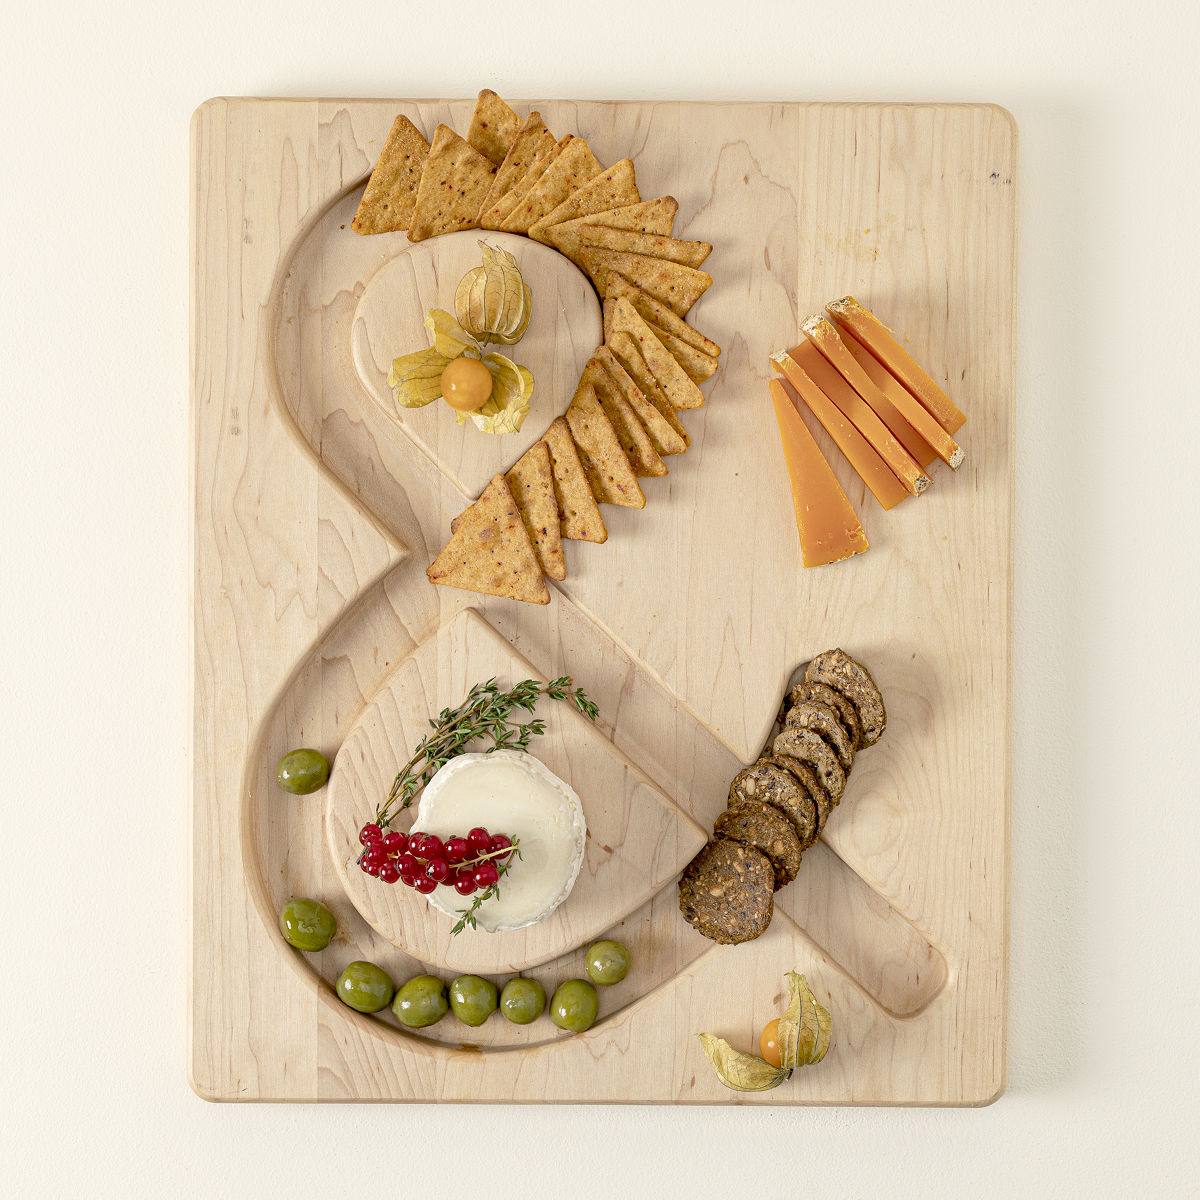 Cheese & Crackers Serving Board | cheese and crackers, maple wood, tray ...